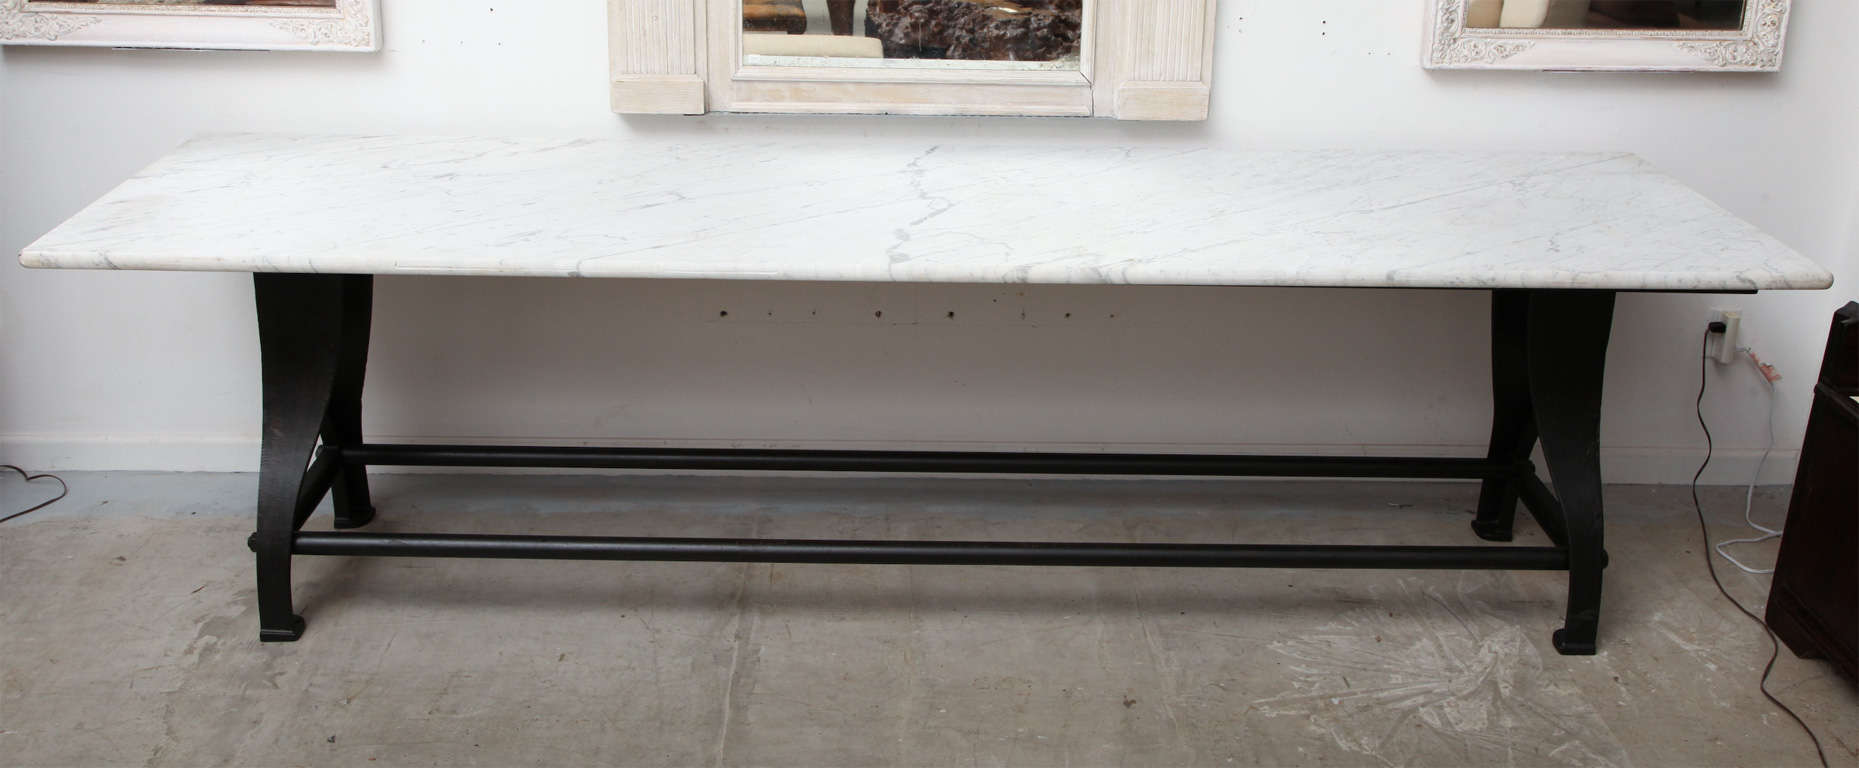 Honed carrera marble top on industrial iron base